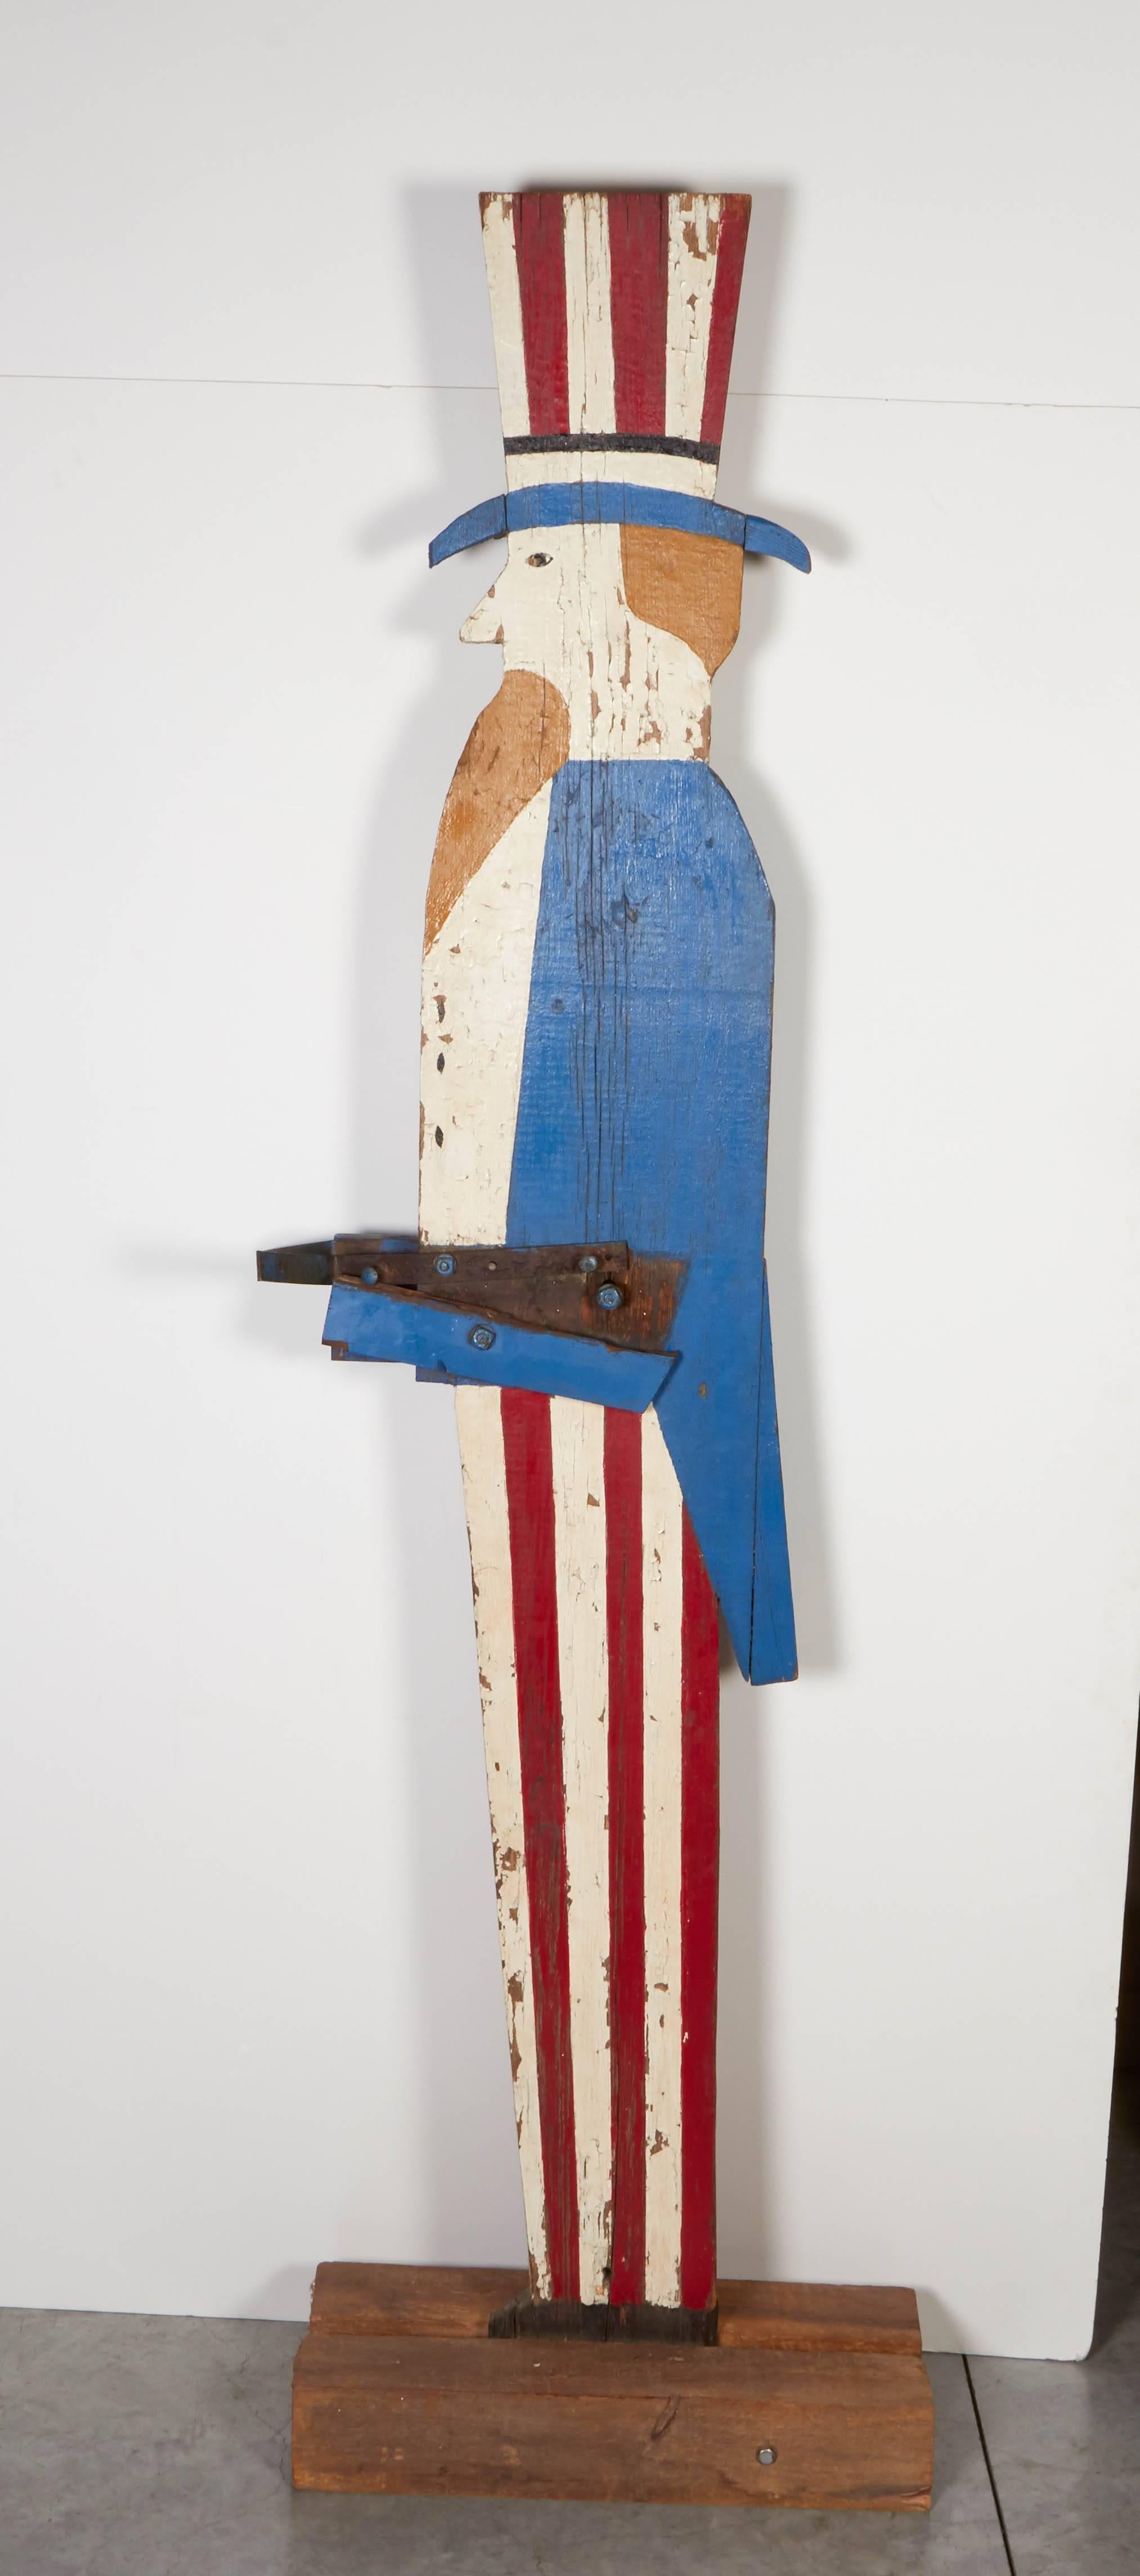 A nicely carved, brightly painted figure of Uncle Sam mounted on two wooden blocks. This large piece, painted on both sides, stands at more than six feet tall. A Classic Folk Art piece from the 1960s. M938.